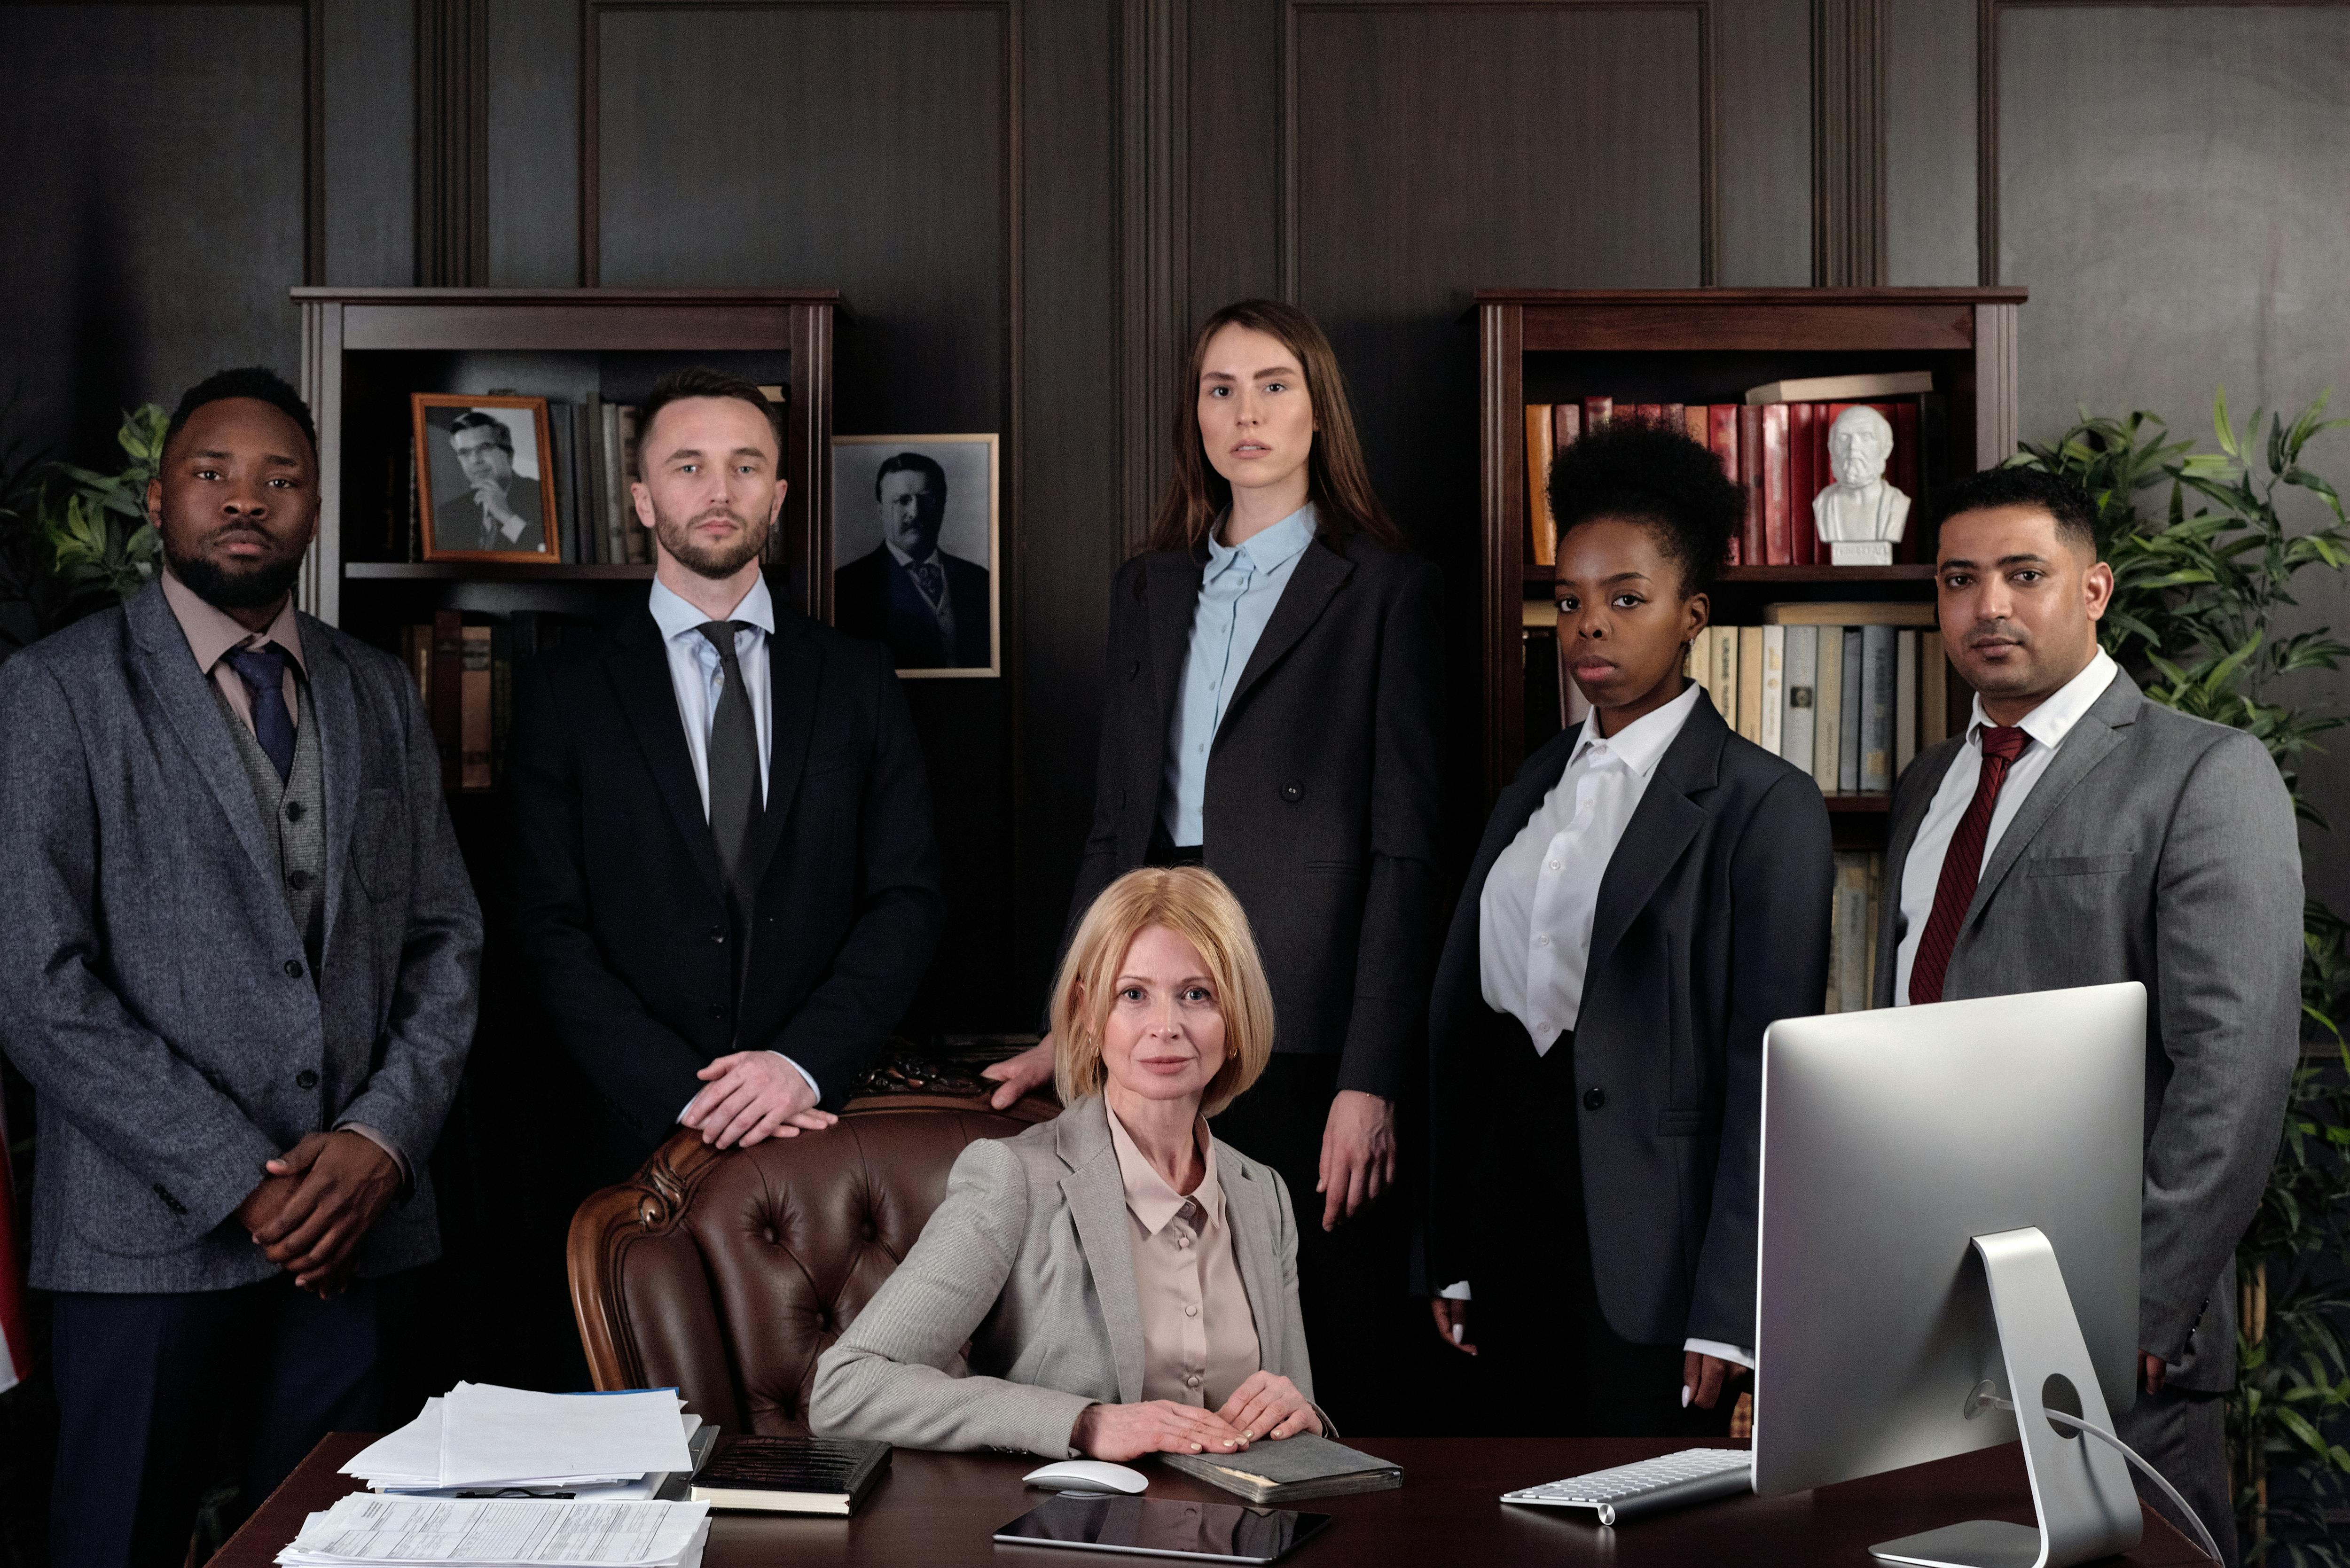 Lawyers posing by a desk | Source: Pexels